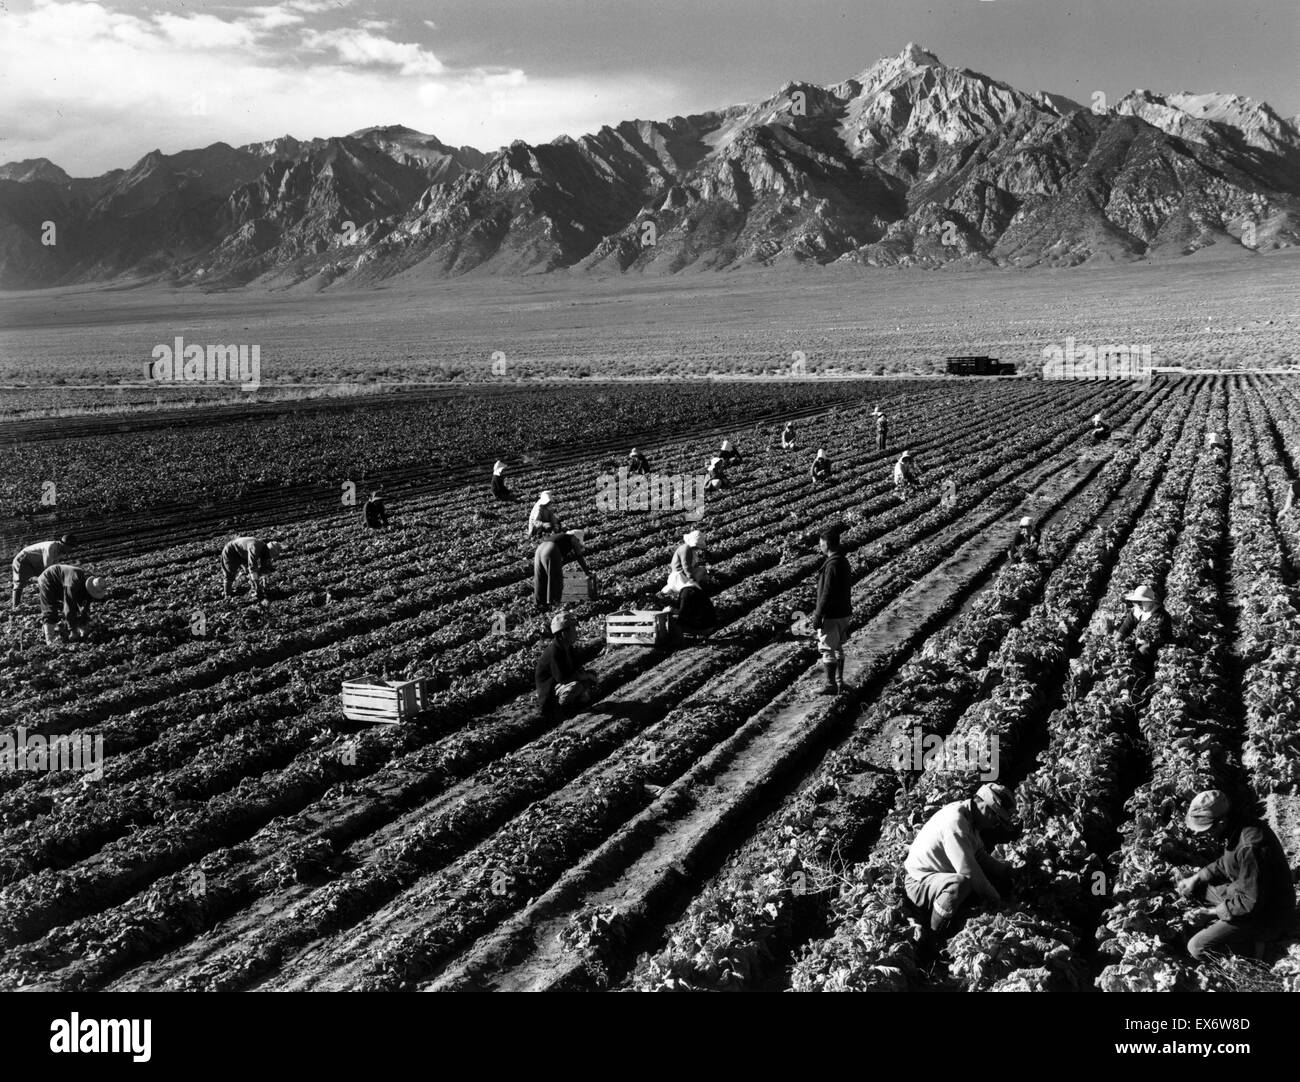 Photographic print of farm workers with Mt. Williamson in the background, Manzanar Relocation Centre. Photographed by Ansel Adams (1902-1984) American photographer and environmentalist, well known for his black and white landscape photographs of the Ameri Stock Photo